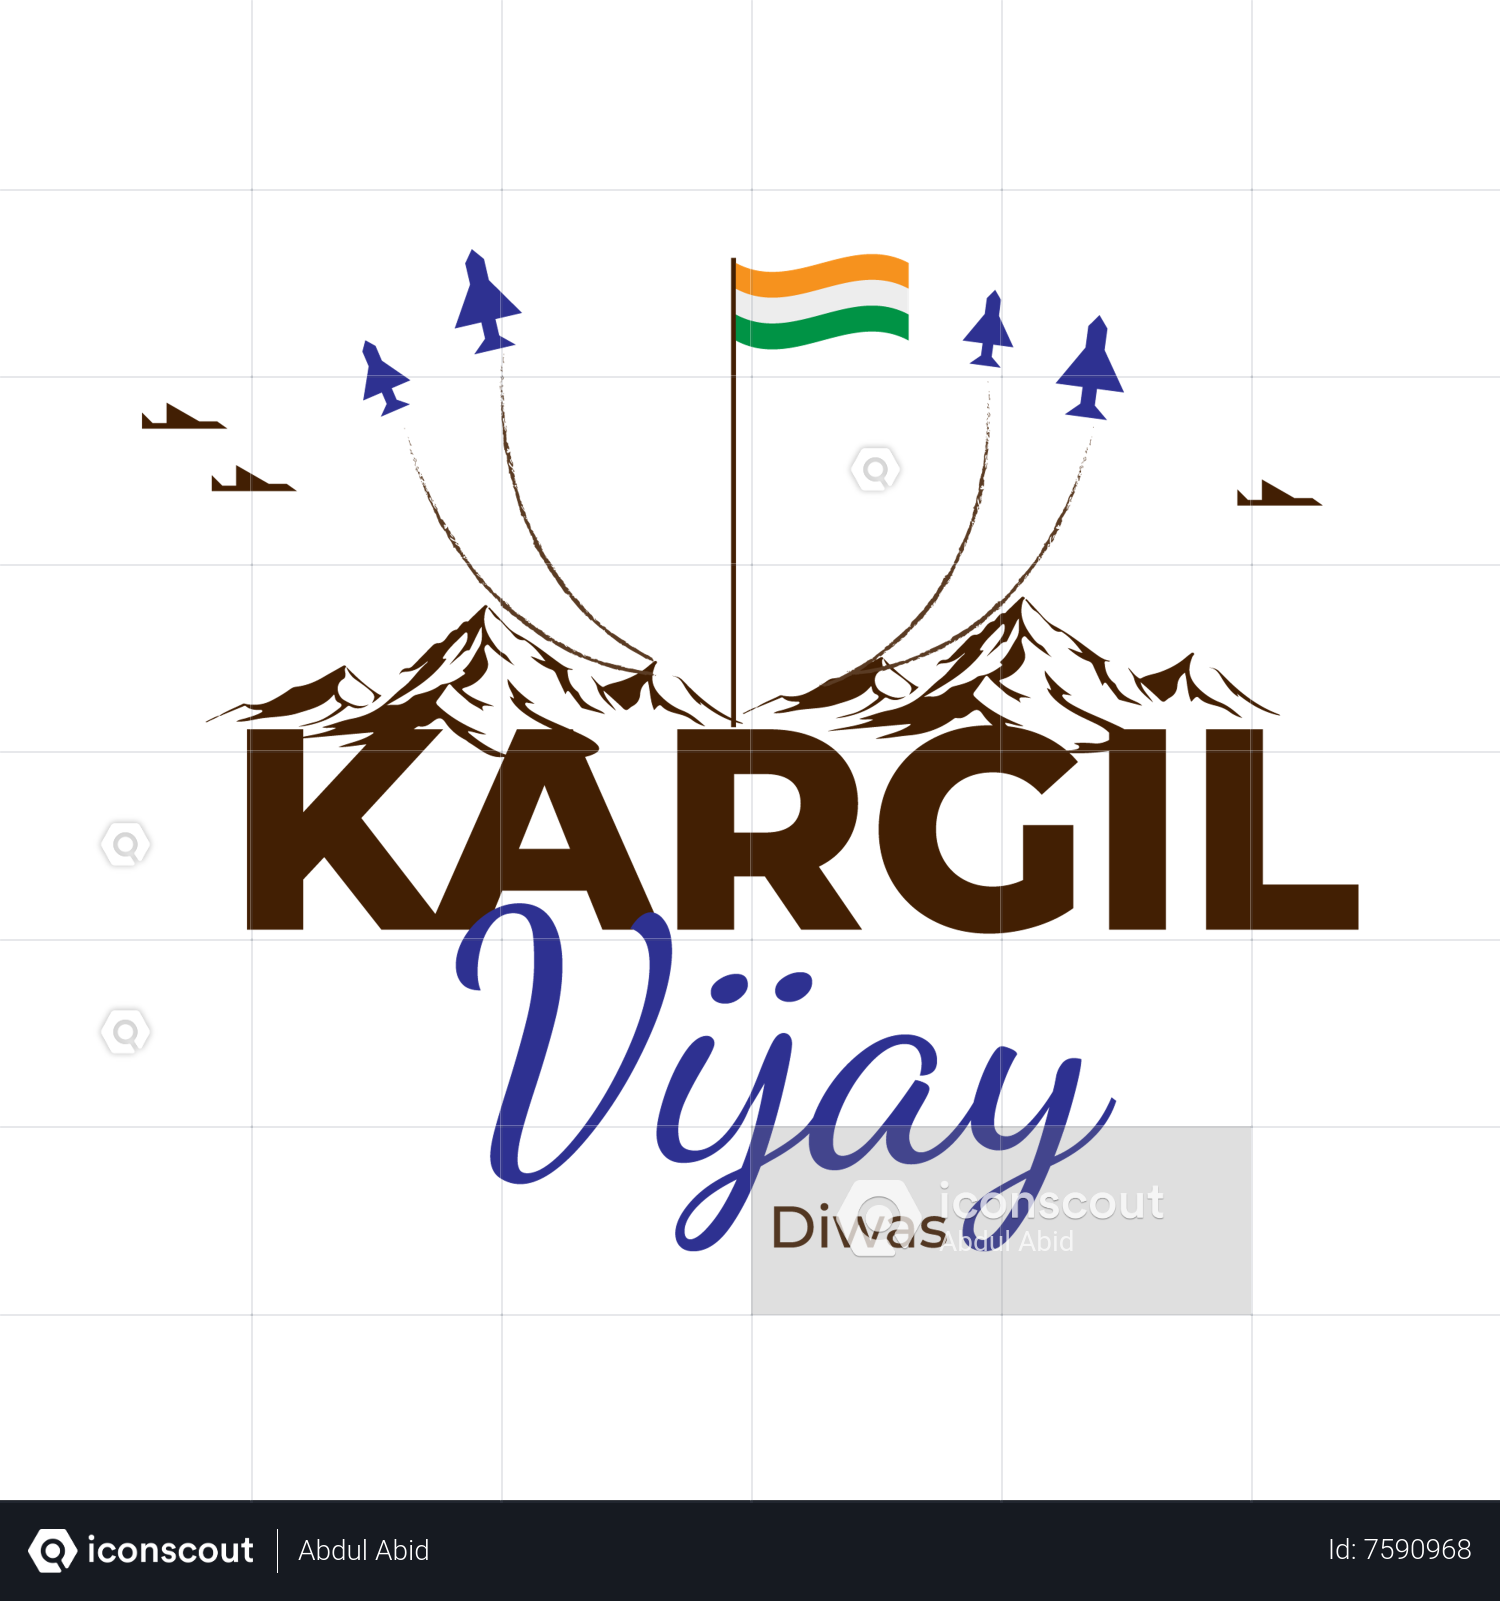 Congress pays tribute to Kargil martyrs on Vijay Diwas - The Earth News  Network